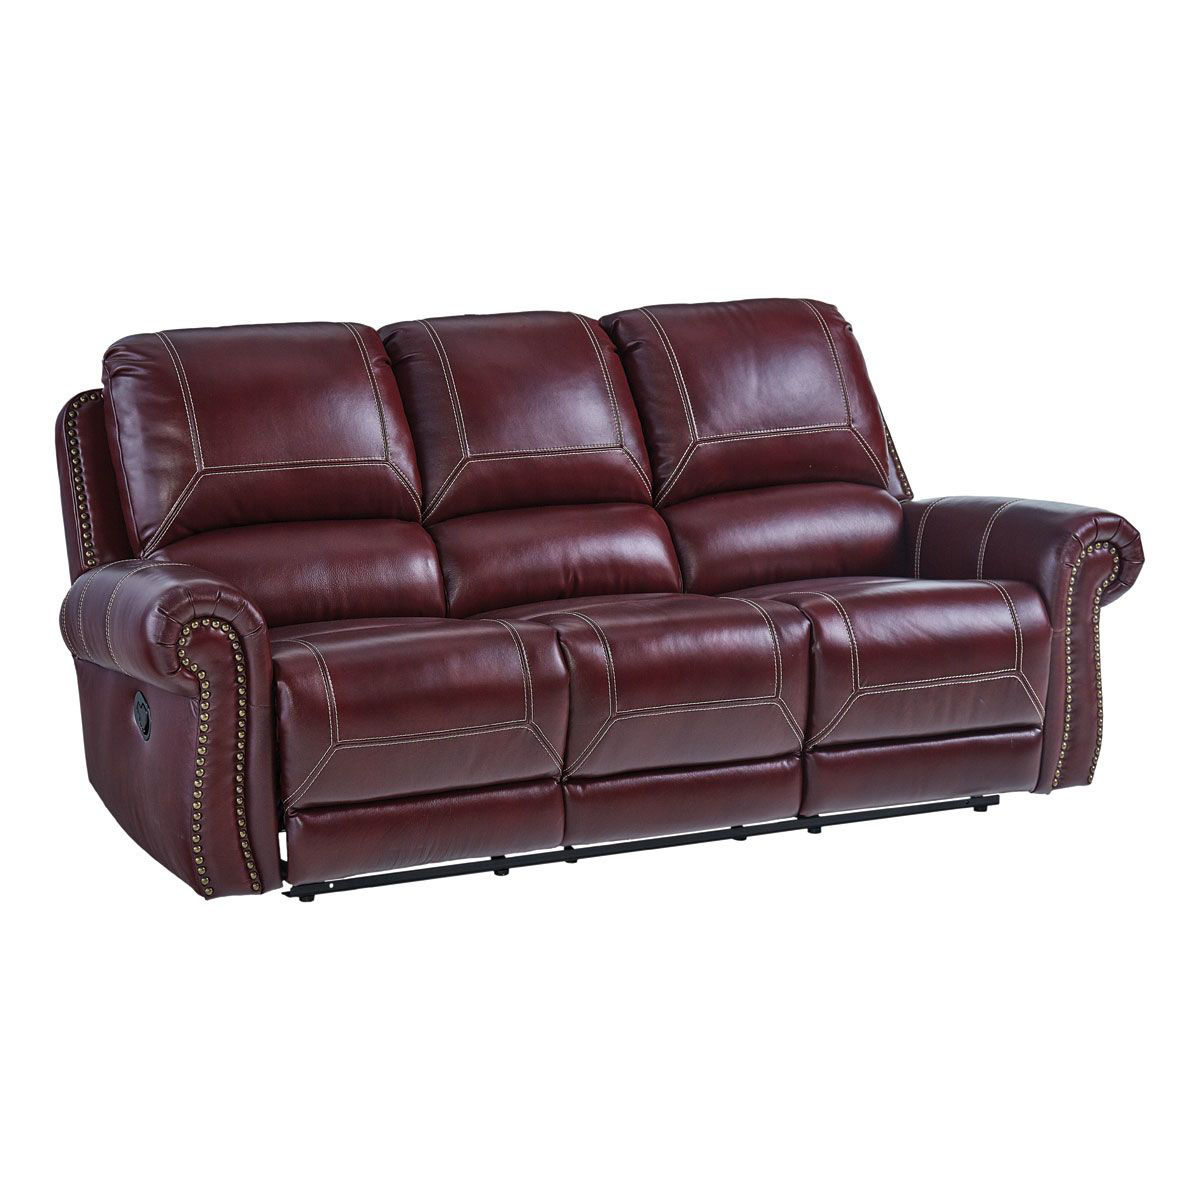 Ss Leather Reclining Sofa